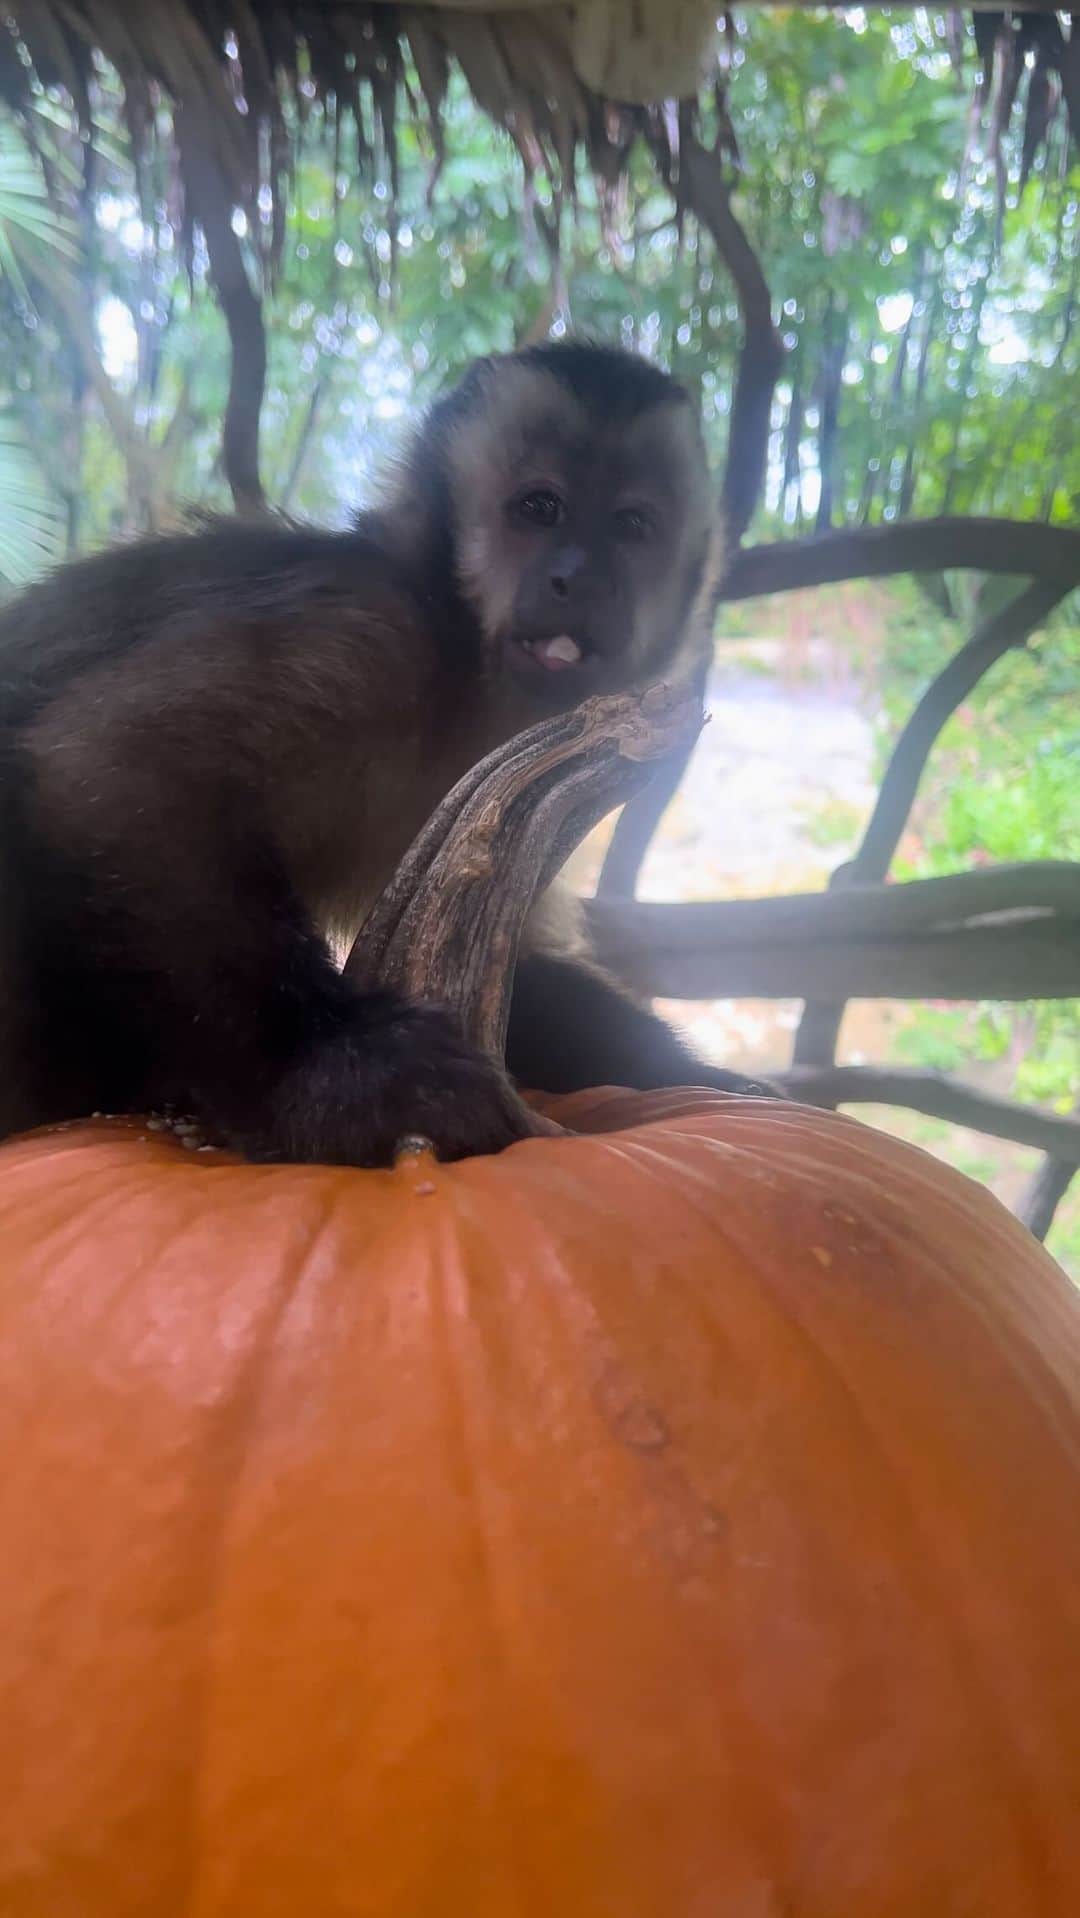 Zoological Wildlife Foundationのインスタグラム：「Have you visited our #pumpkinpatch yet? You never know who you’ll meet when you stop by for your photo opportunity. 📸 🎃   When you visit, you’re not only indulging in seasonal delight, but you’re also supporting our mission of wildlife conservation. Every ticket purchase directly contributes to our efforts to protect and preserve endangered species.  Don’t miss out on this extraordinary experience! Tickets are selling fast, so hurry and secure your spot to enjoy the perfect blend of wildlife and pumpkin magic. Join us at the Zoological Wildlife Foundation and create cherished memories this pumpkin season!  #spookyseason #harvest #fall #thingstodoinmiami」